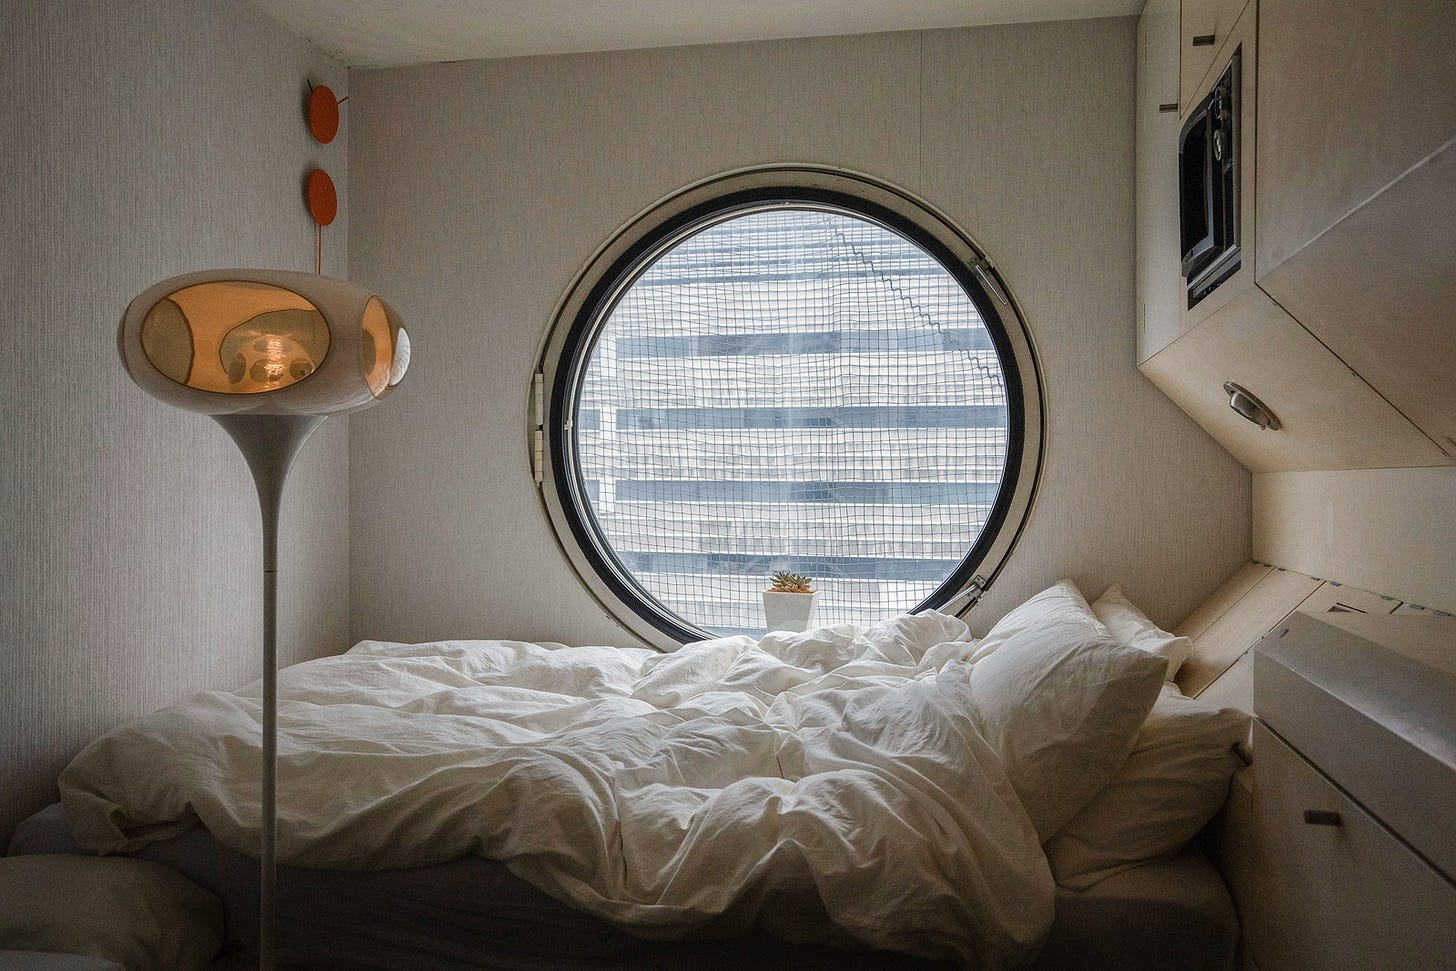 The interior of one of the Nakagin capsules, looking toward its iconic porthole window. Under the window is a bed that stretches the width of the room, with a killer Jetsons style floor lamp on one side and built-in cabinets on the other. 